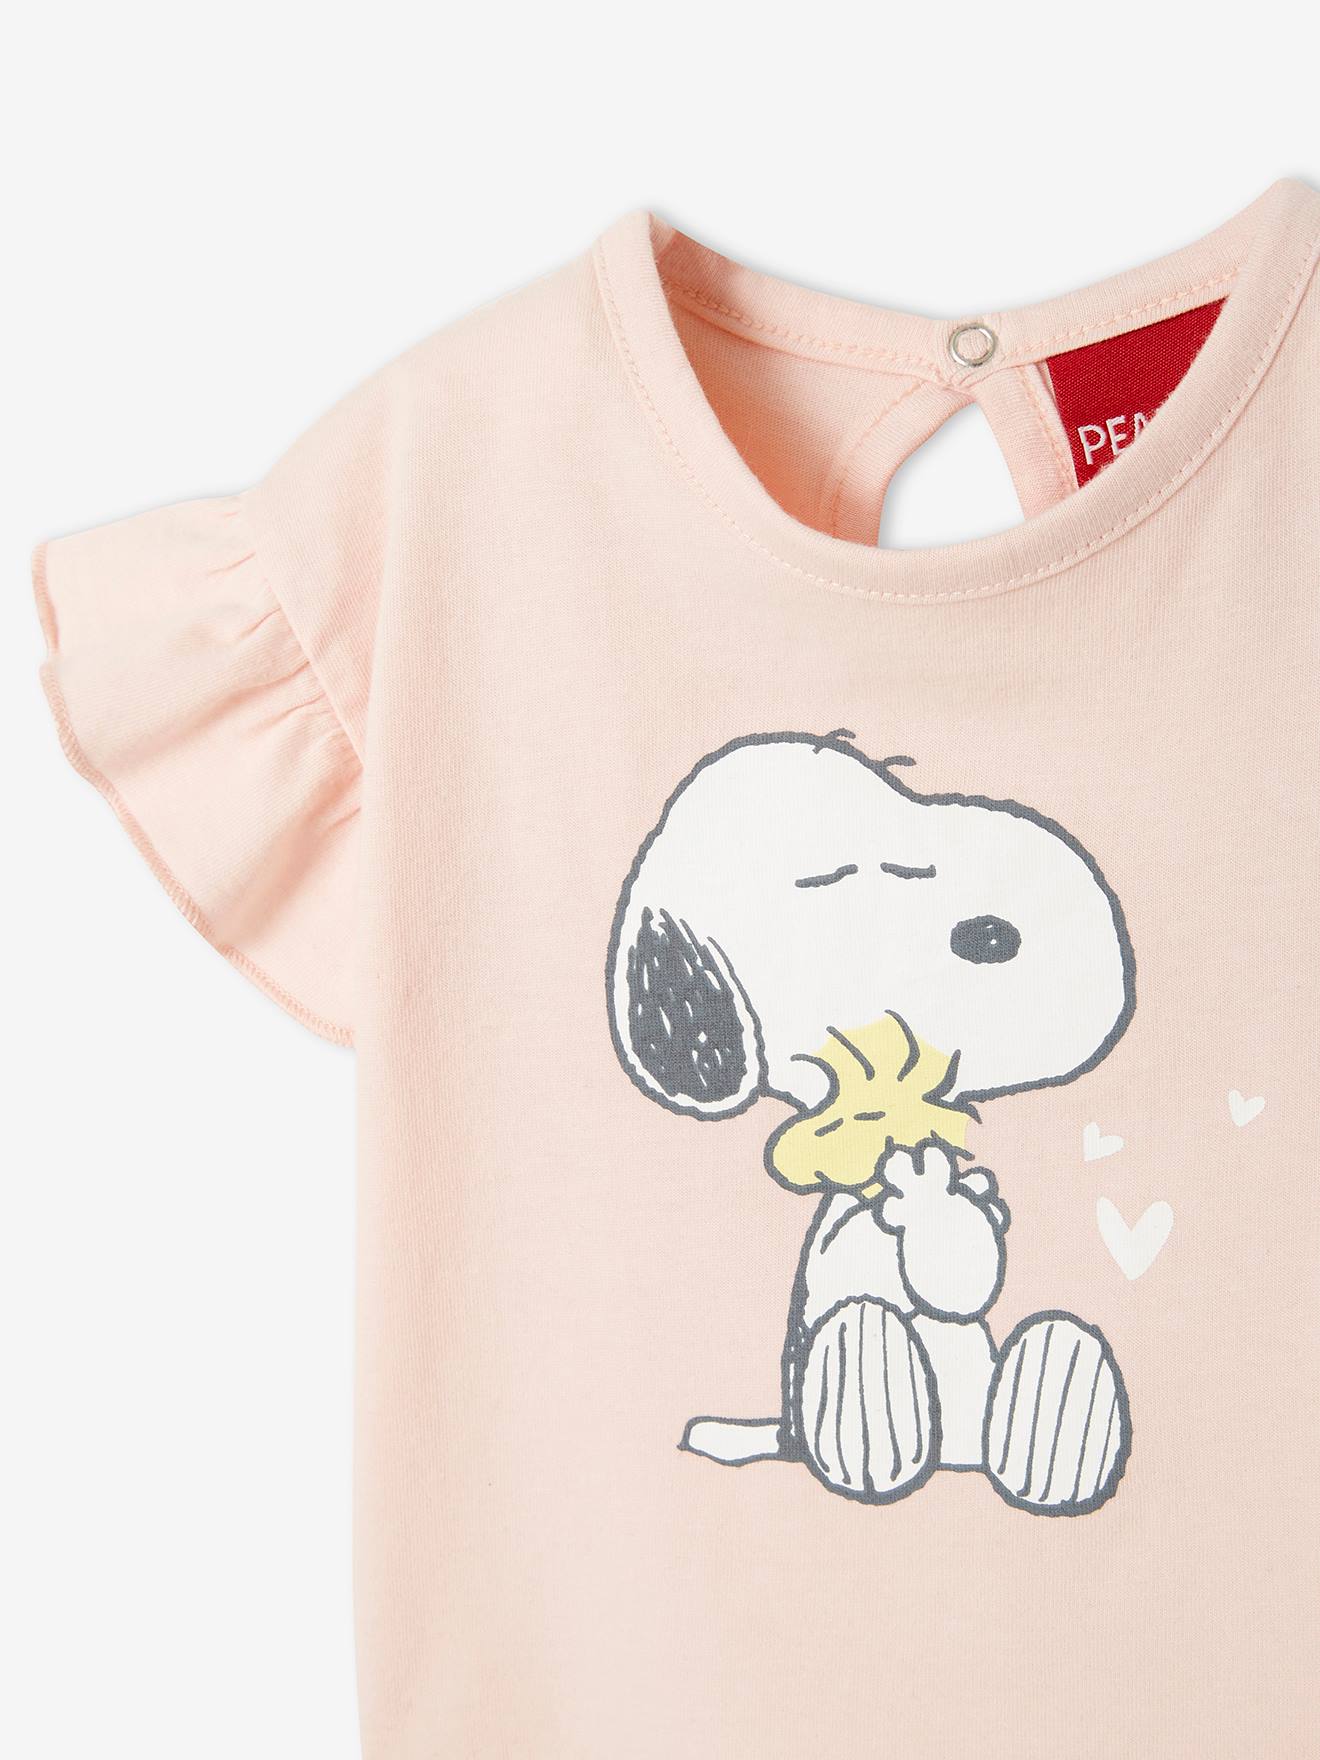 Snoopy T-Shirt for Baby Girls, by Peanuts Pink Medium Solid with Desig